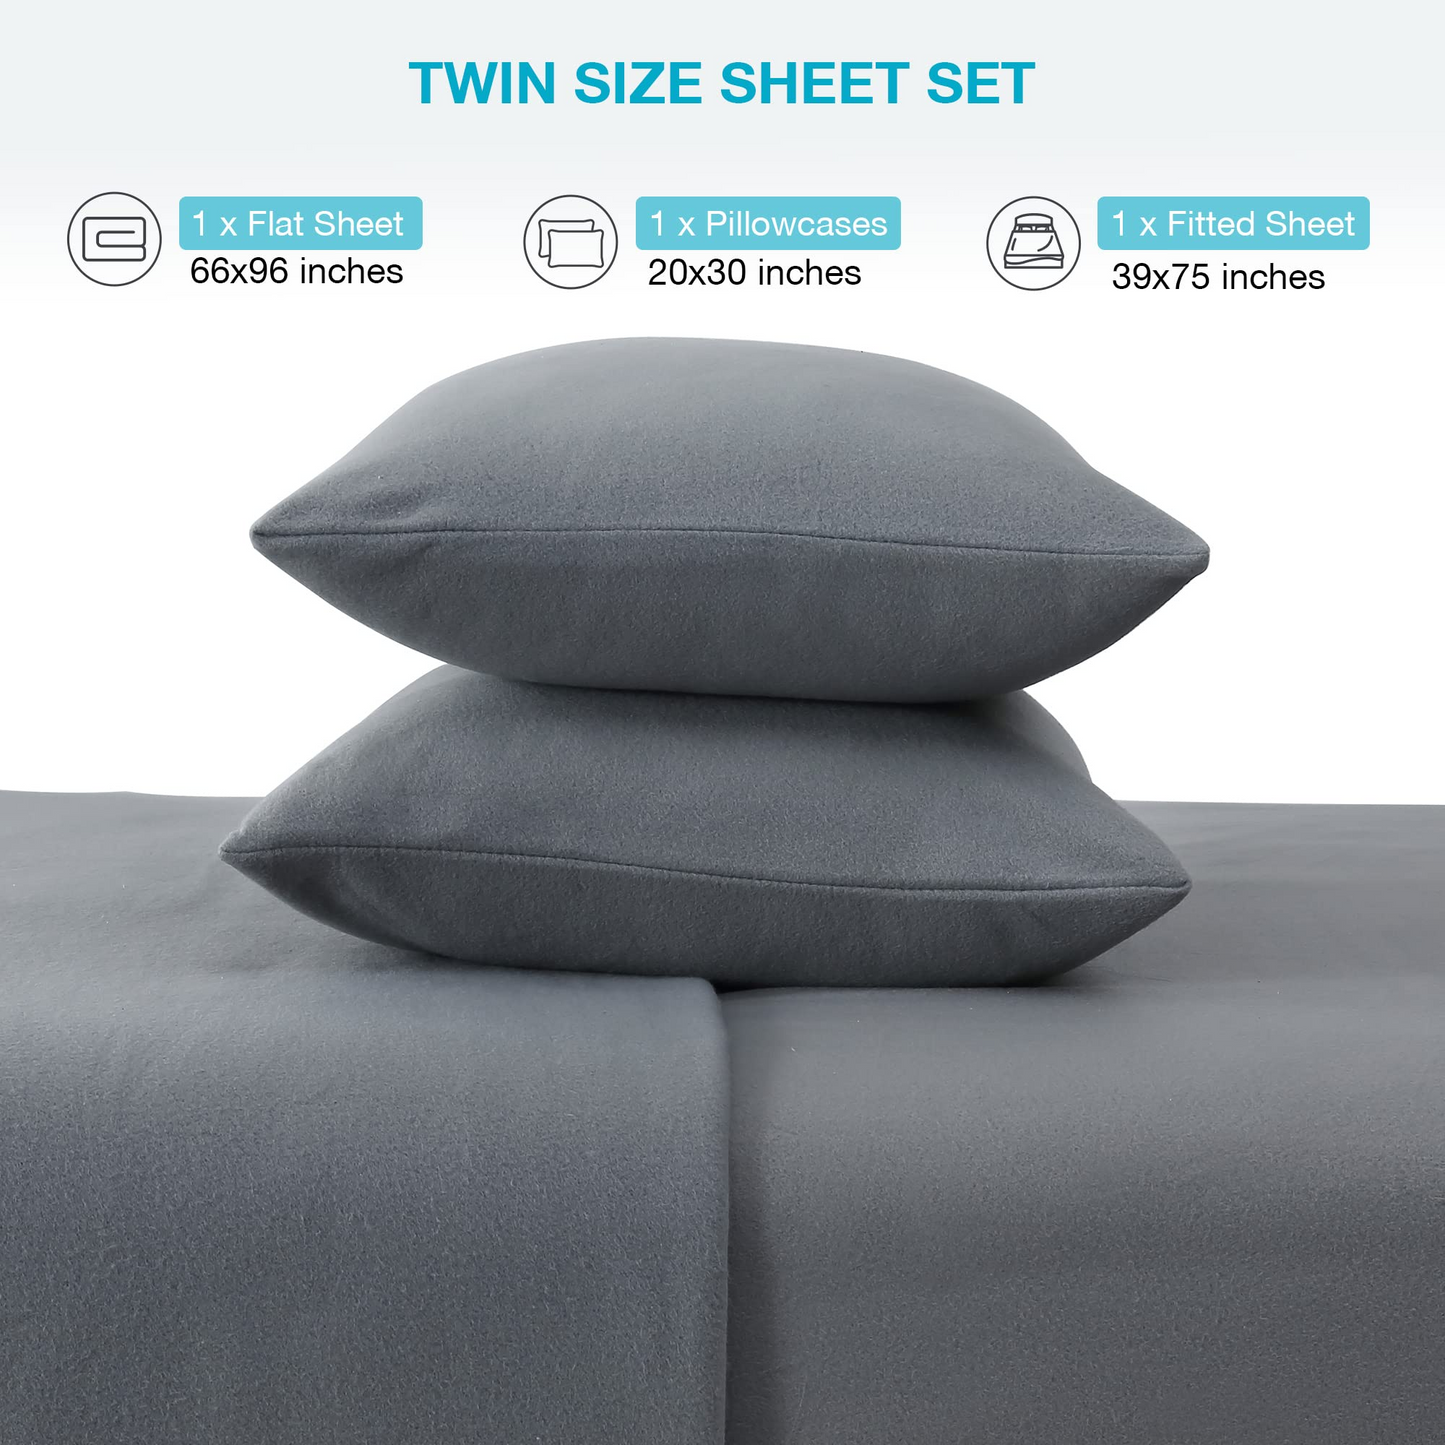 Fleece Twin Sheets Set 3-Piece Fuzzy Bed Sets with 16" Deep Pocket Fitted Sheet, Flat Sheet and Pillowcase，Dark Grey